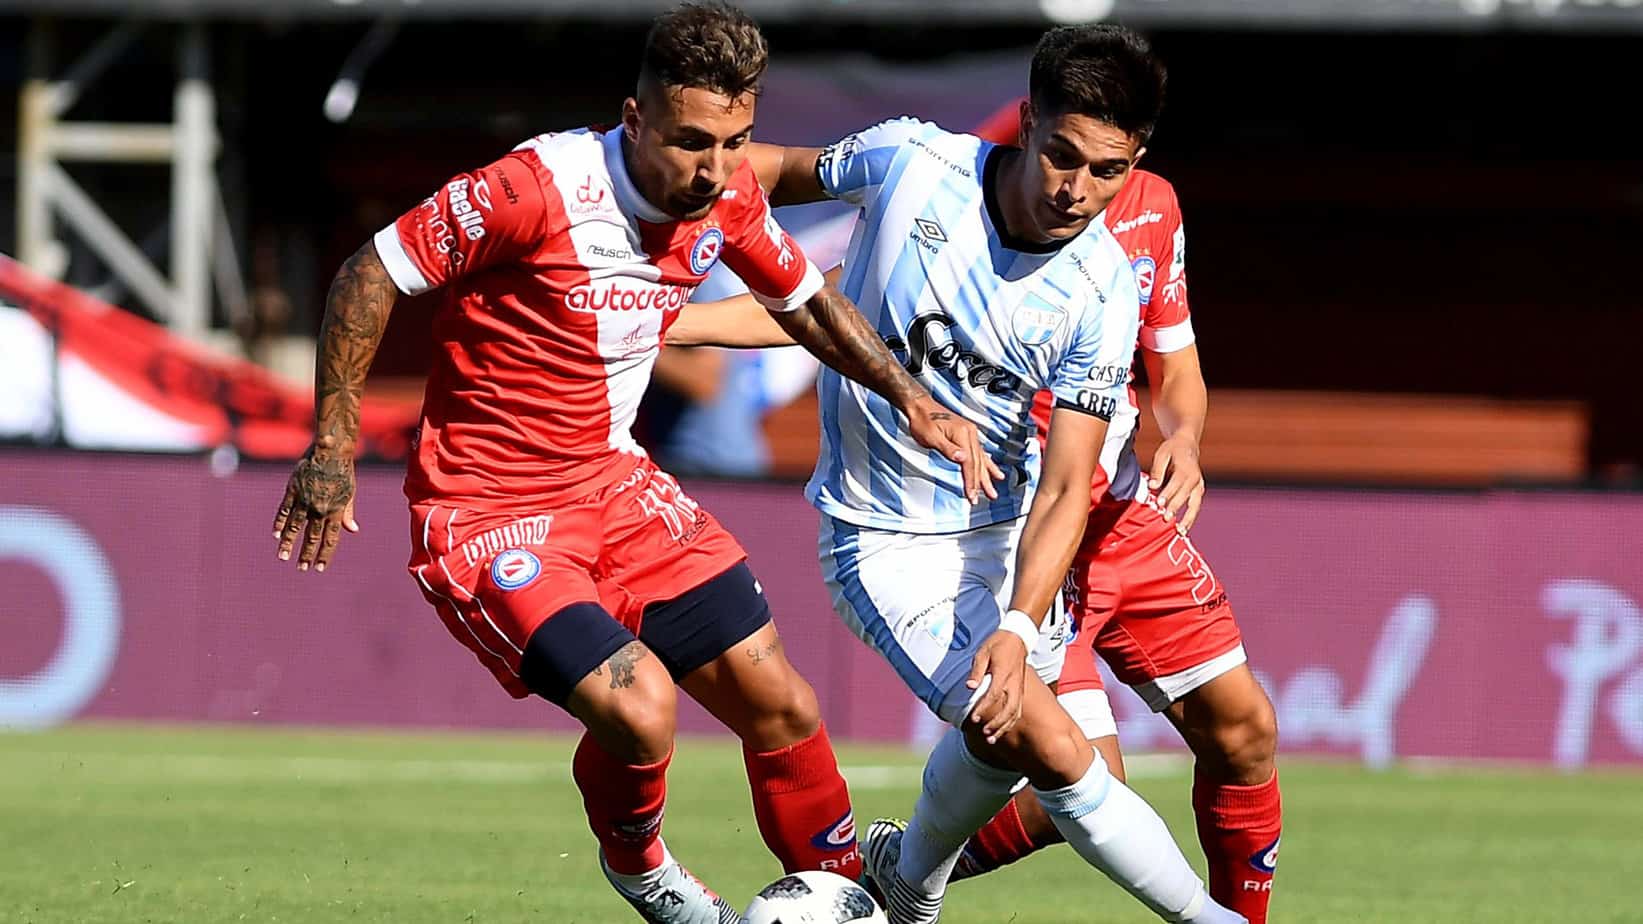 Argentinos Jrs. vs. Atlético Tucumán – Betting Odds and Free Picks